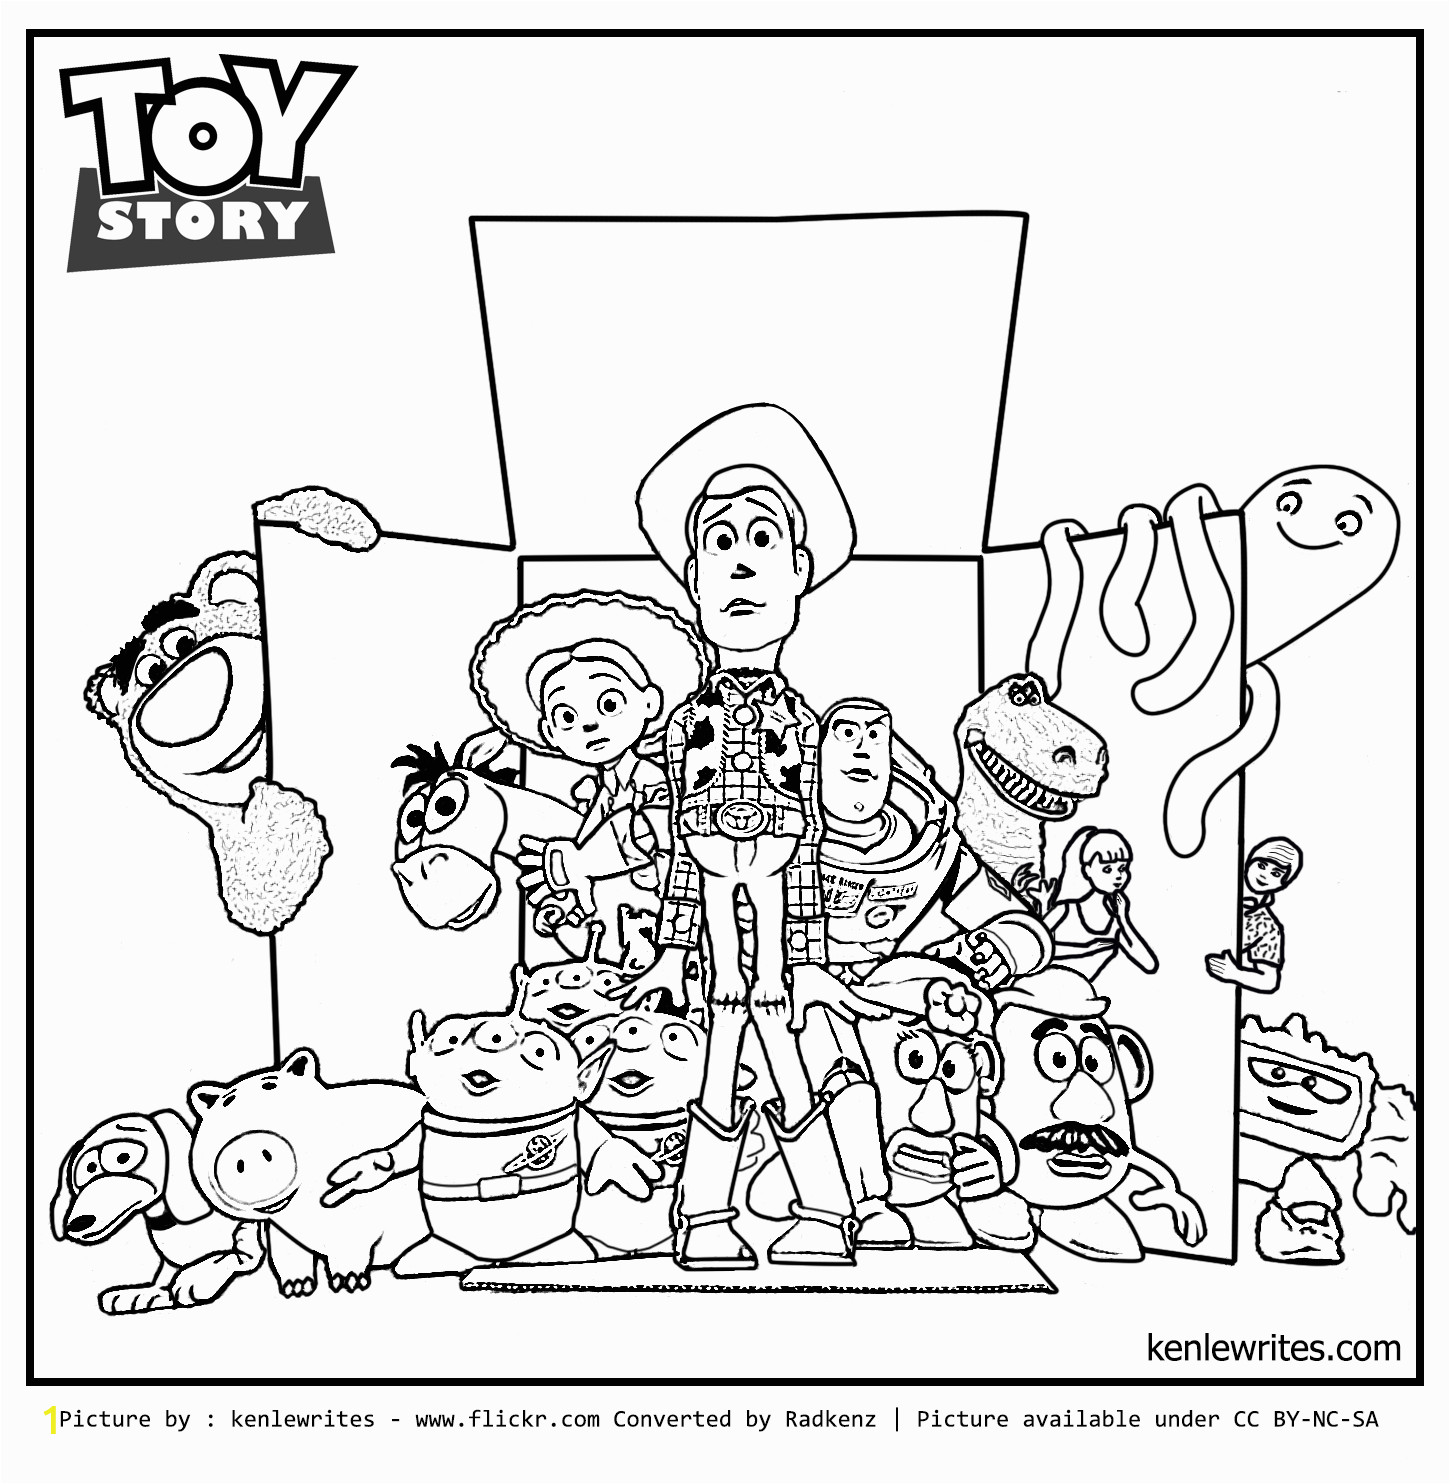 toy story 3 coloring page out of box